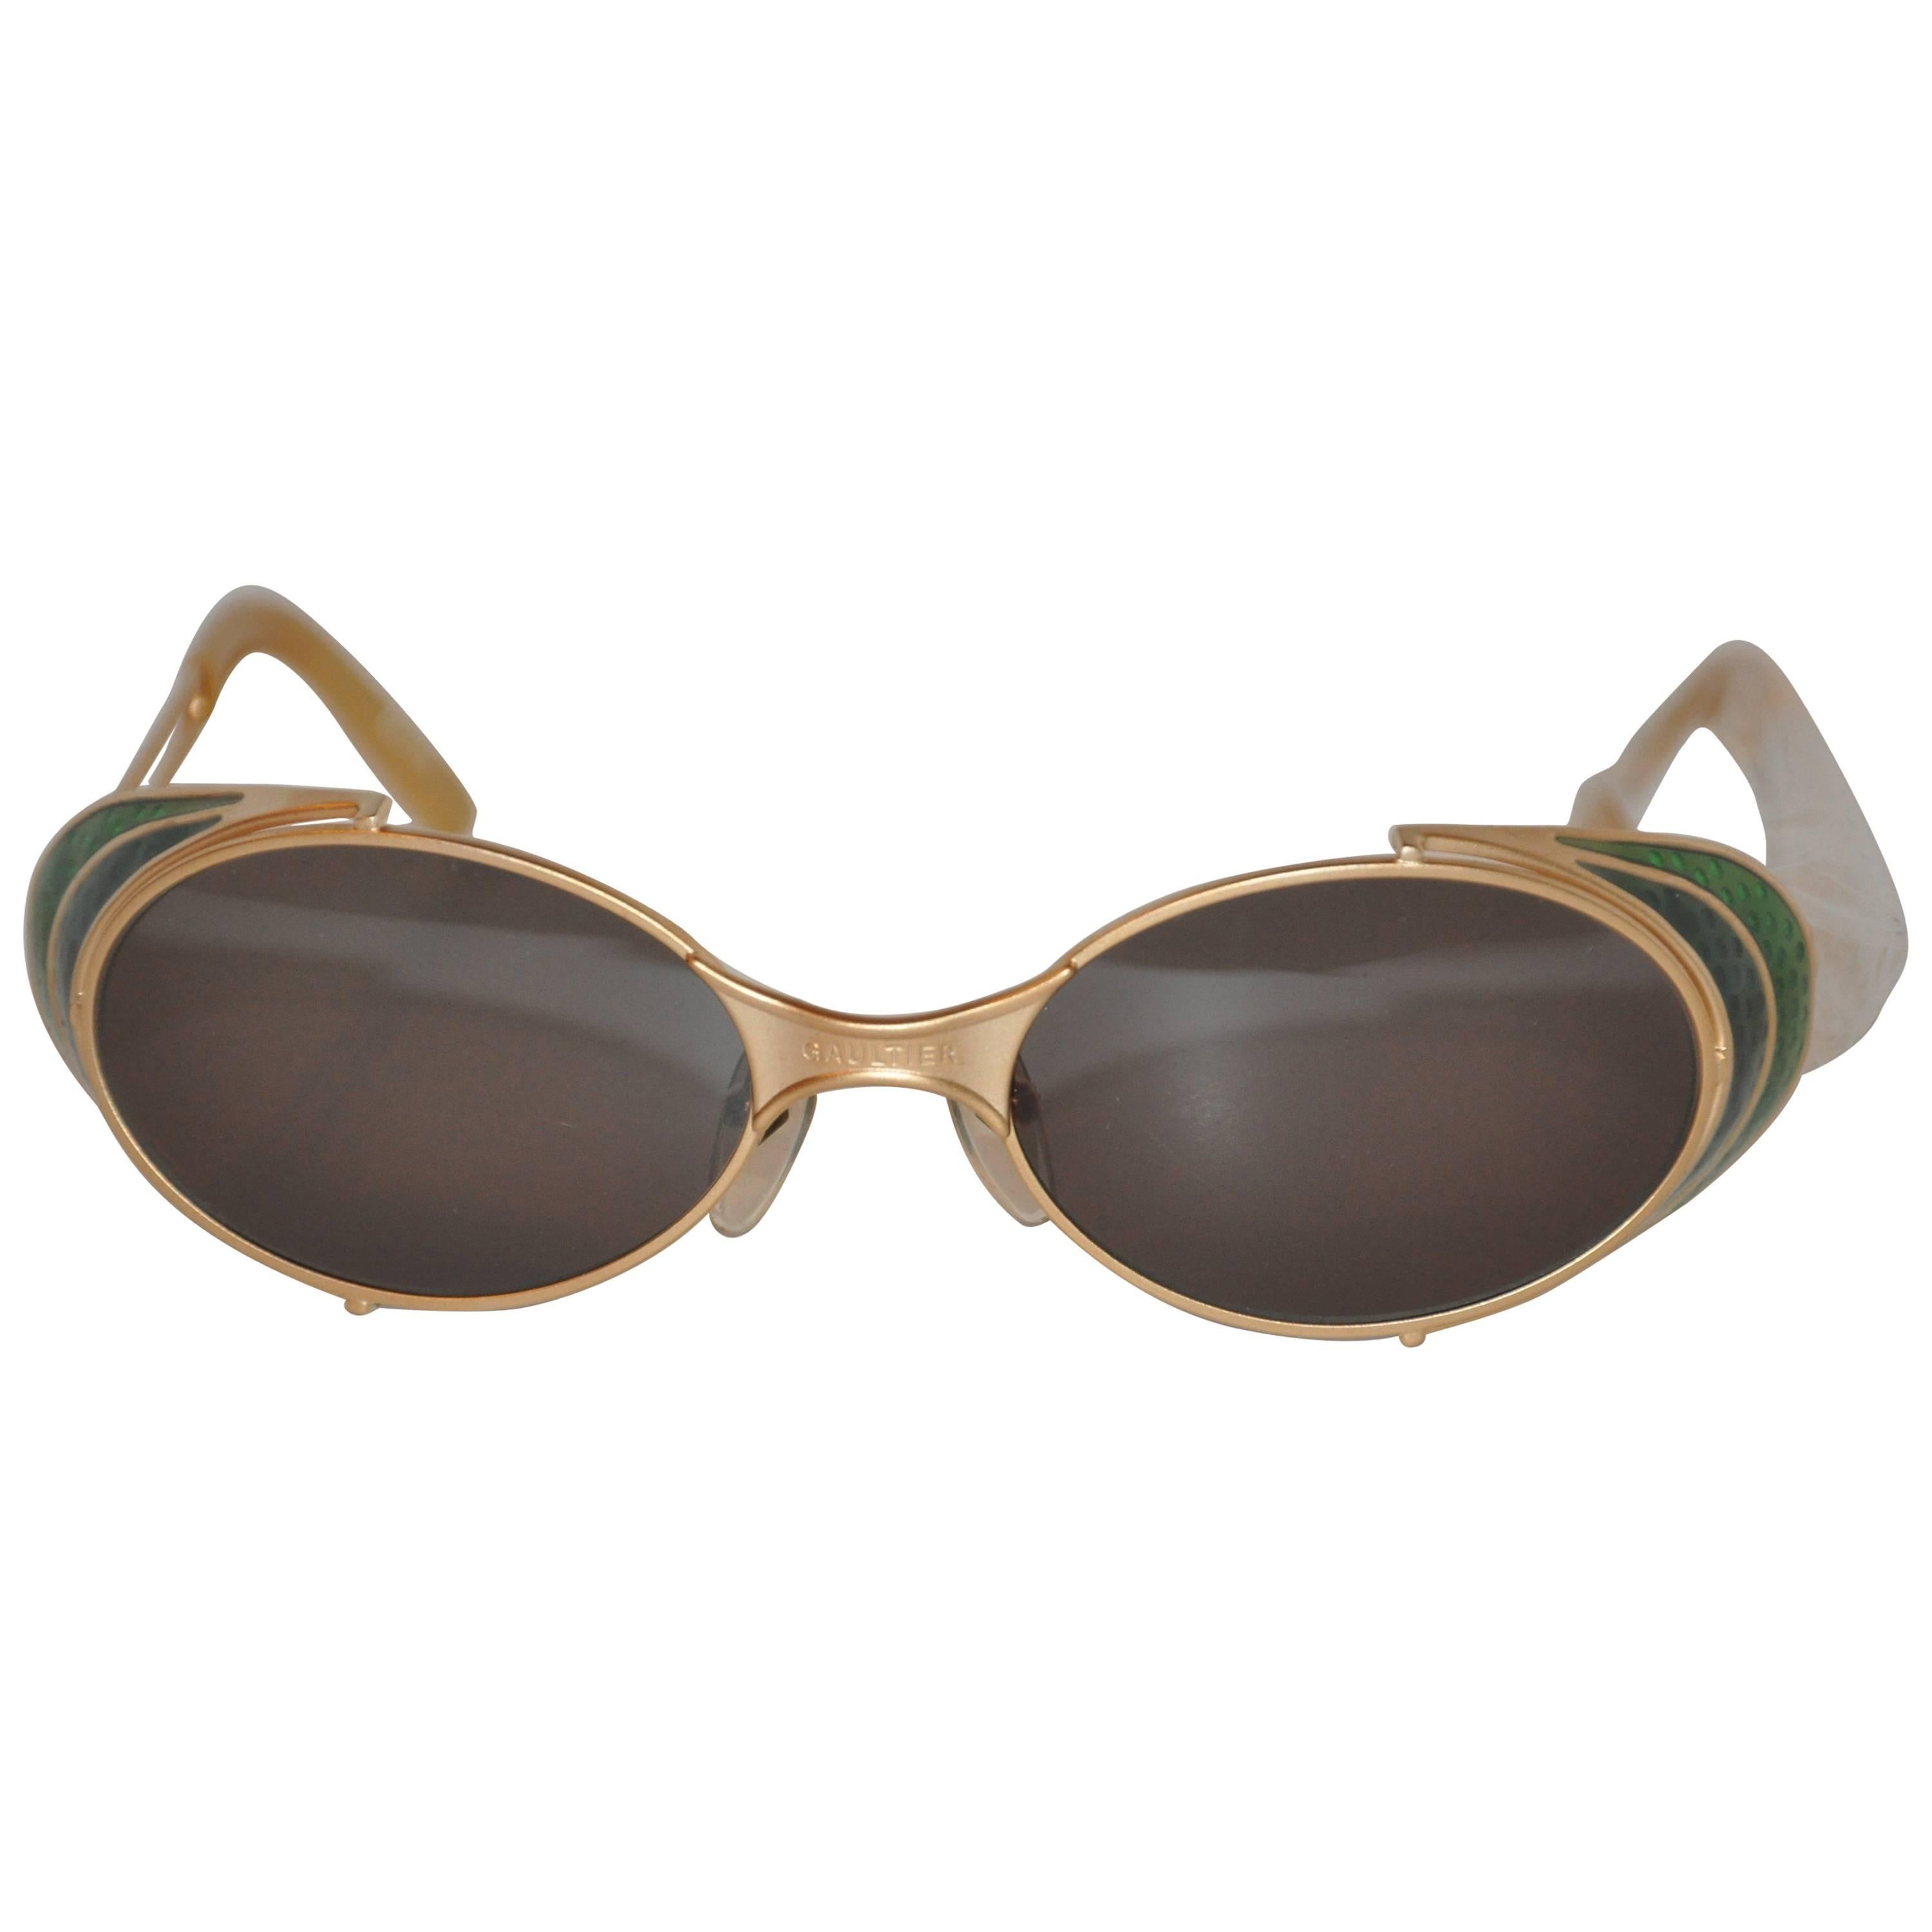 Jean Paul Gaultier "Shades of Greens" Gold Hardware Sunglasses For Sale